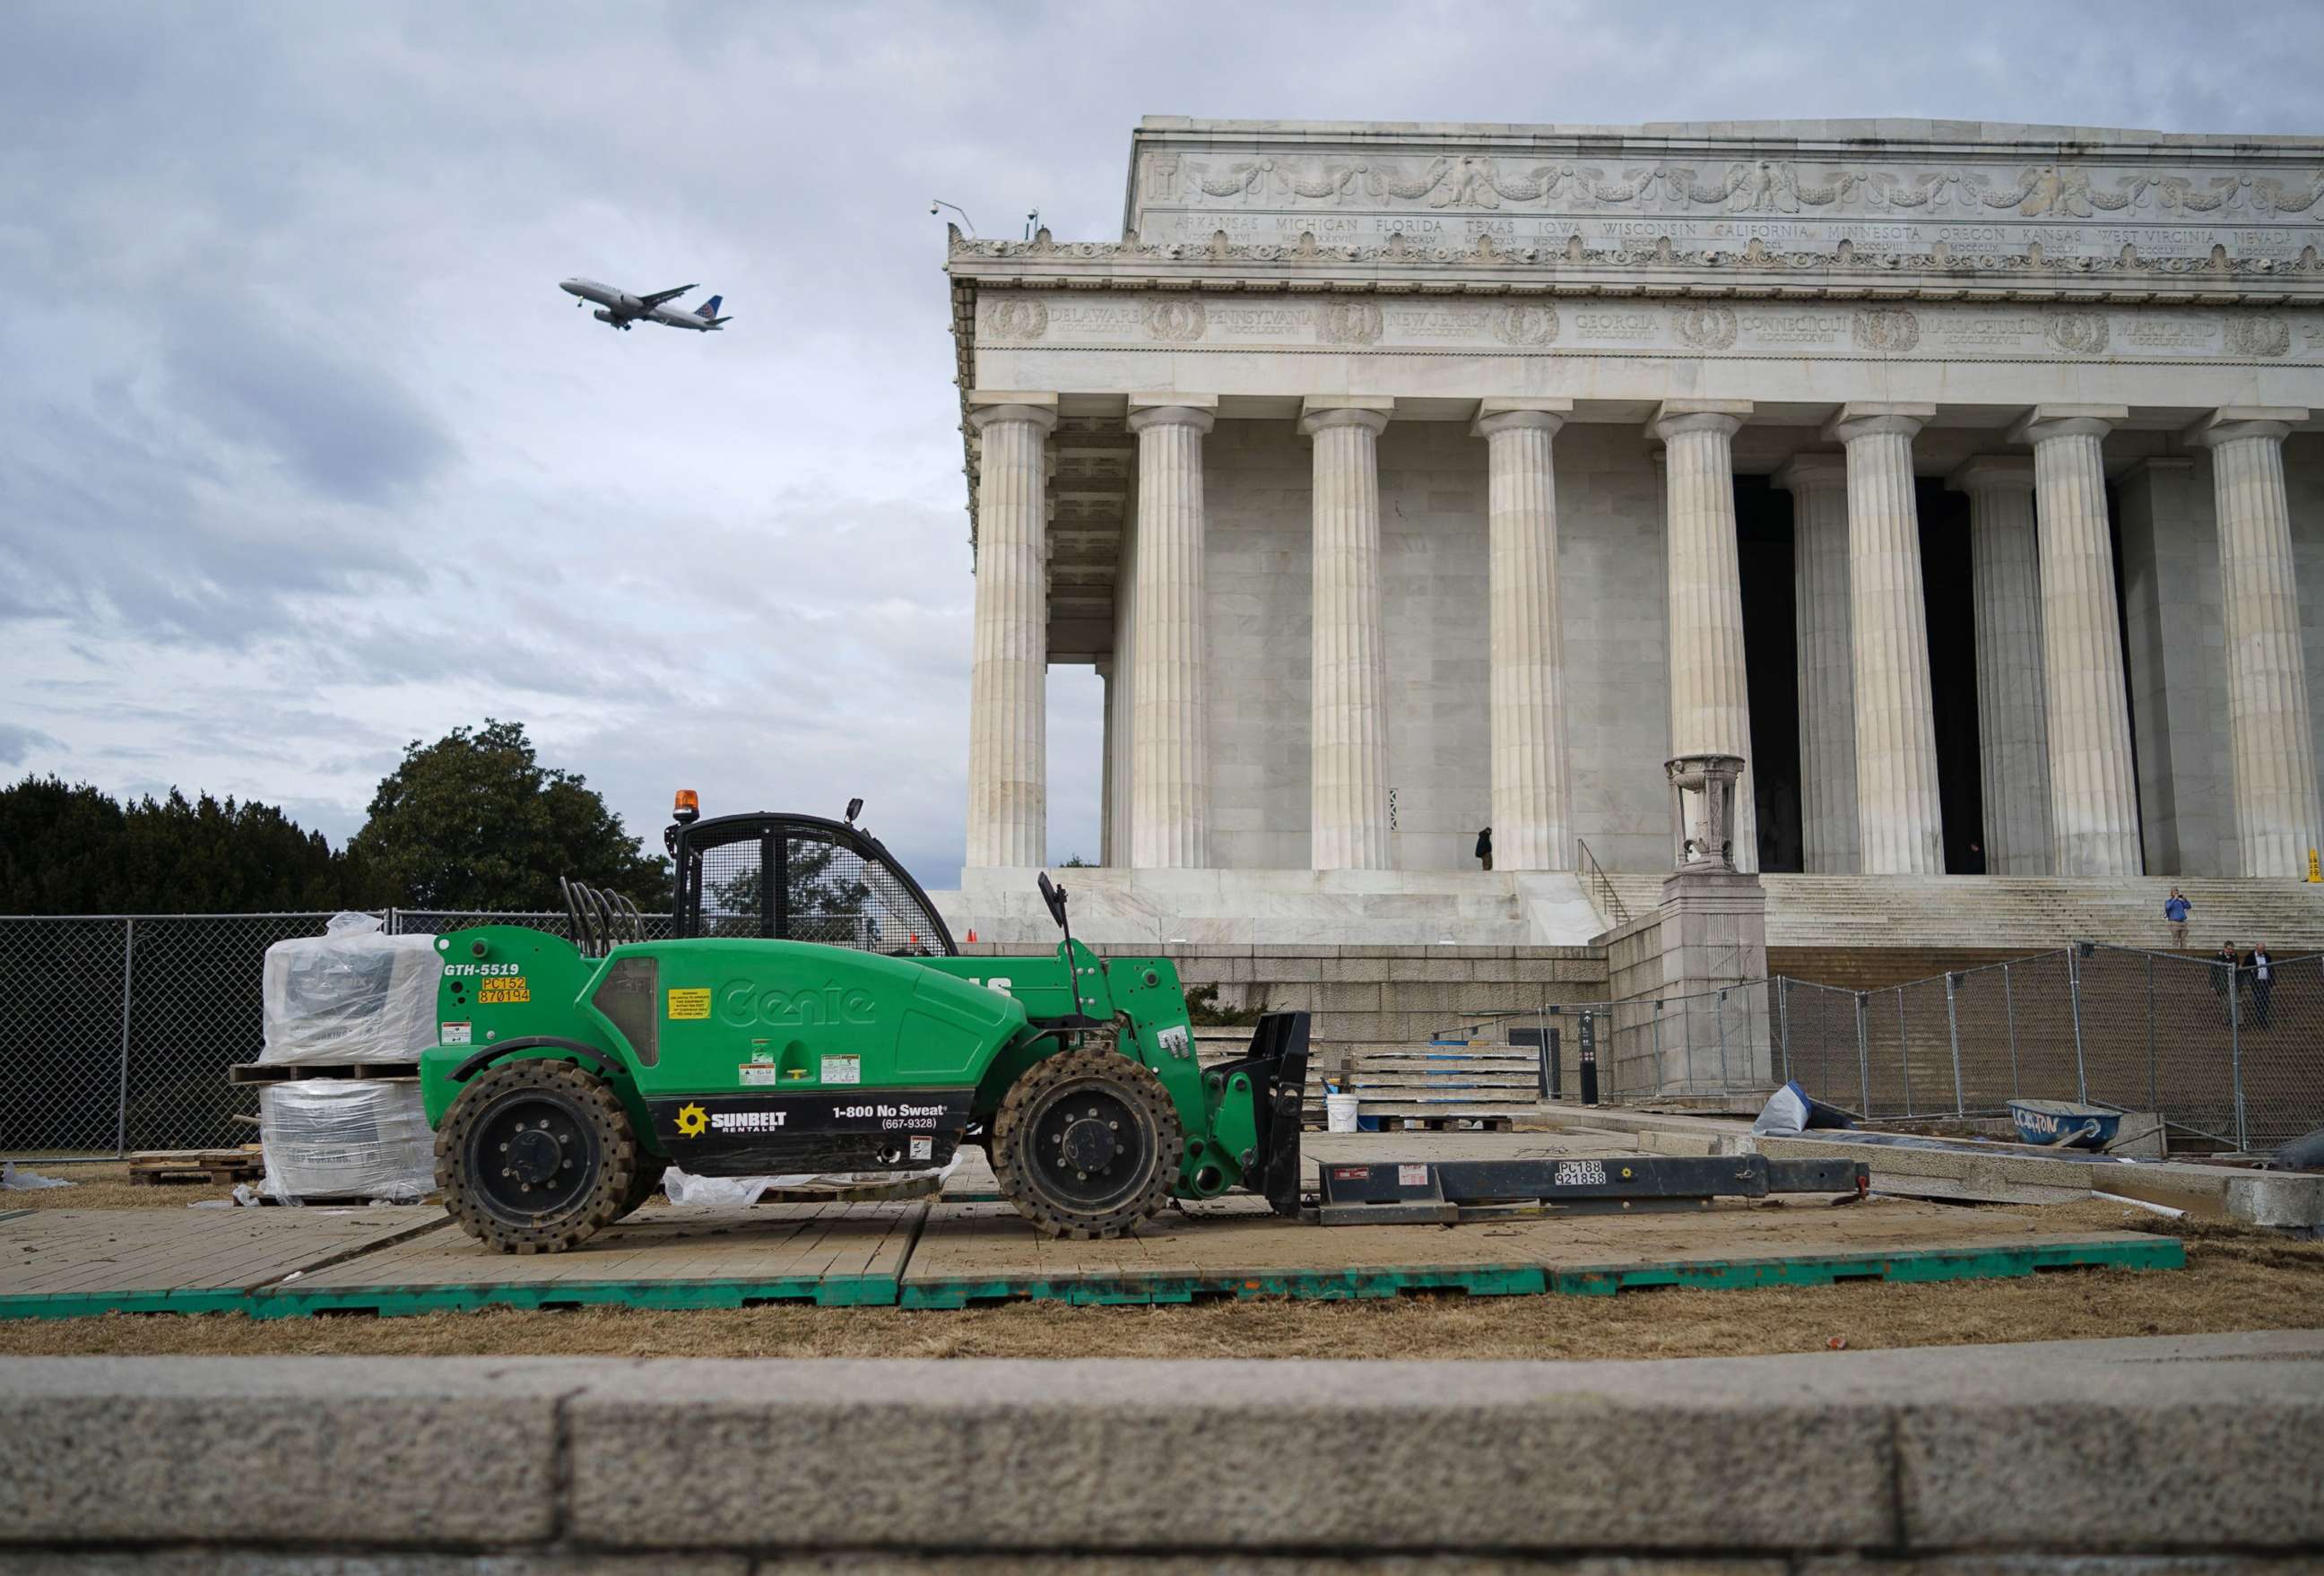 PHOTO: An idle forklift sits in front of the Lincoln Memorial during the government shutdown in Washington, D.C., Jan. 22, 2018.